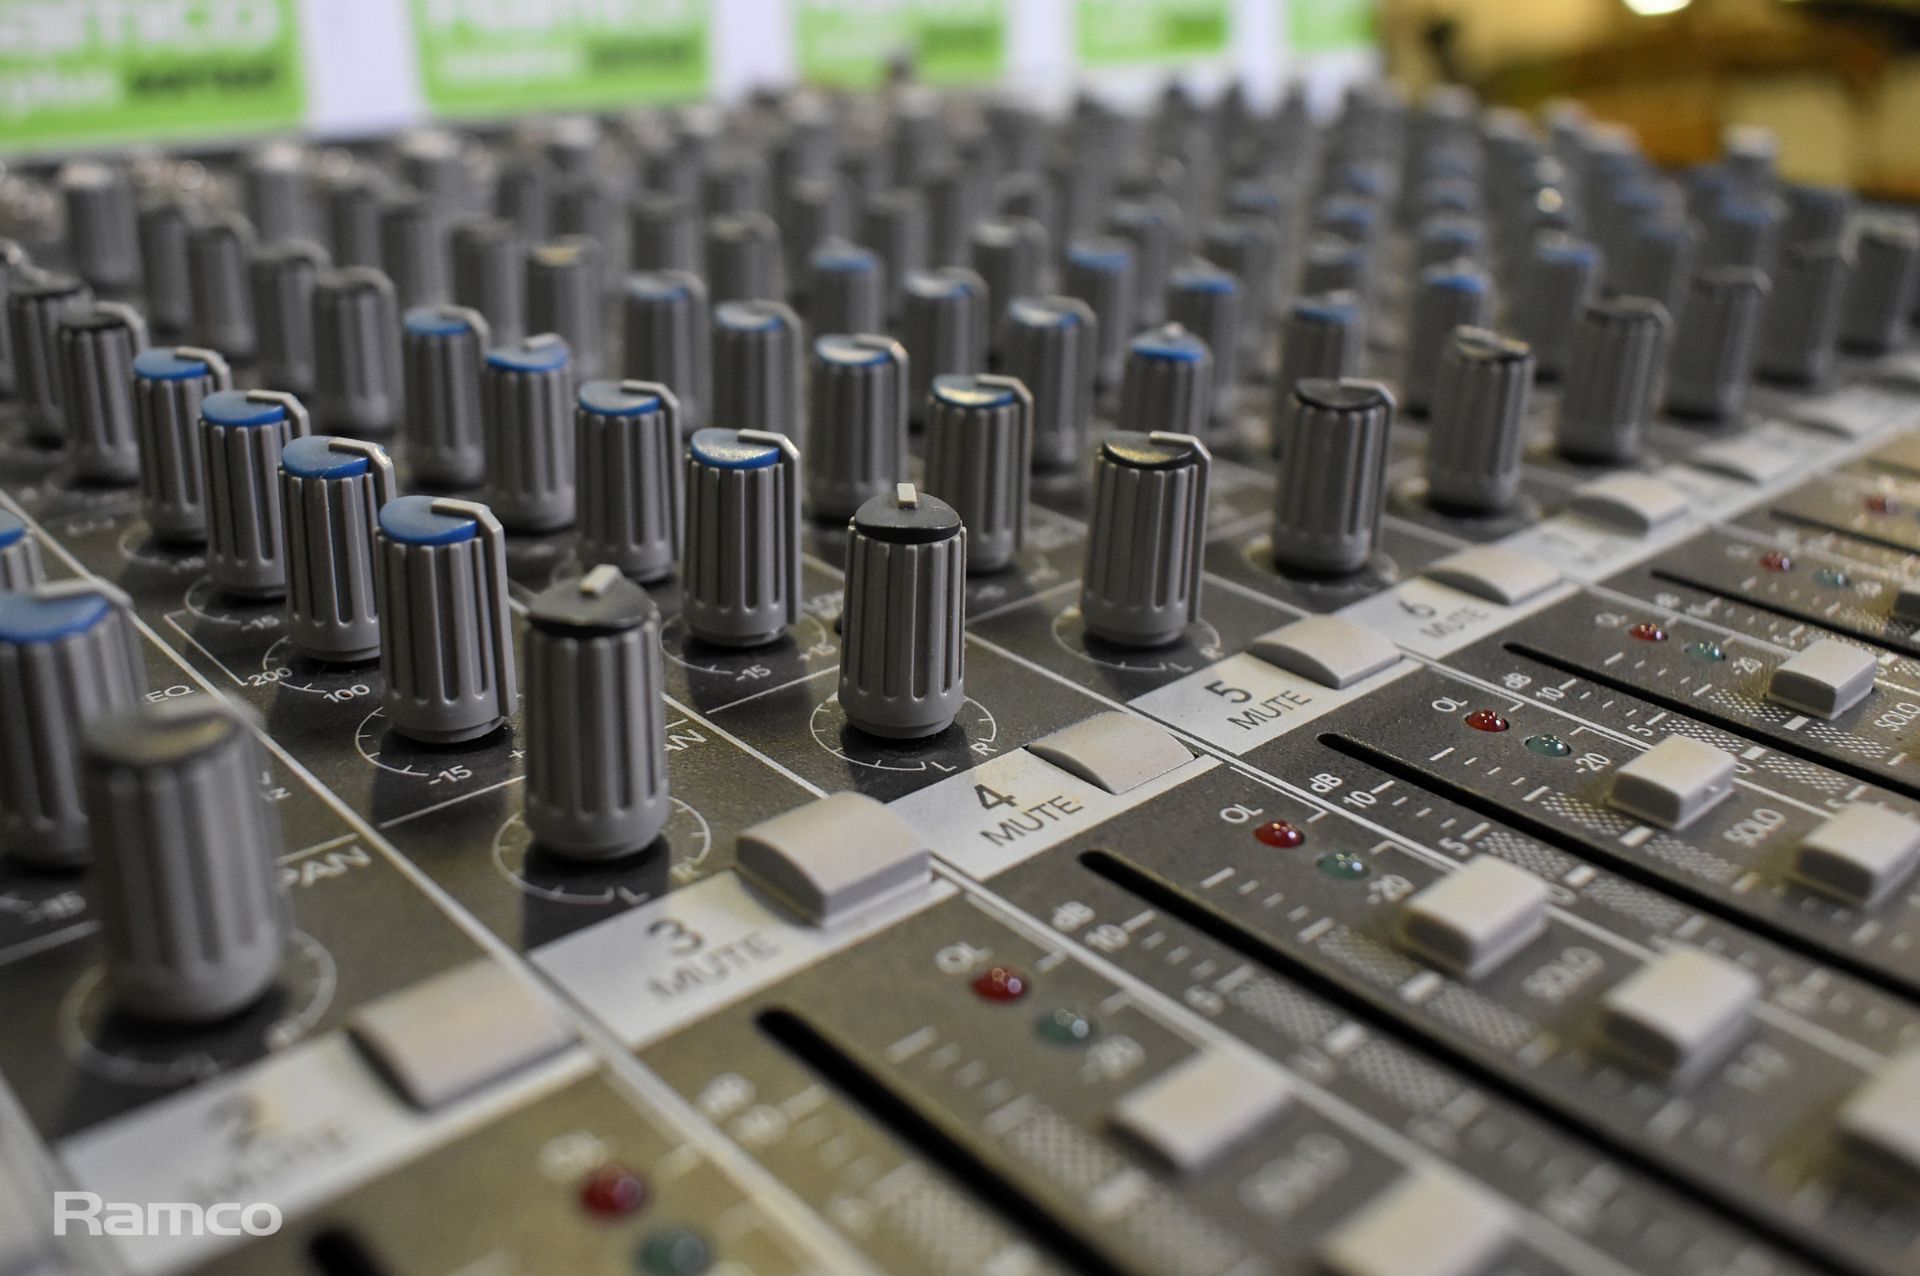 Mackie 1642-VLZ Pro 16 channel mic/line mixer with premium XDR mic preamplifiers - Image 3 of 7